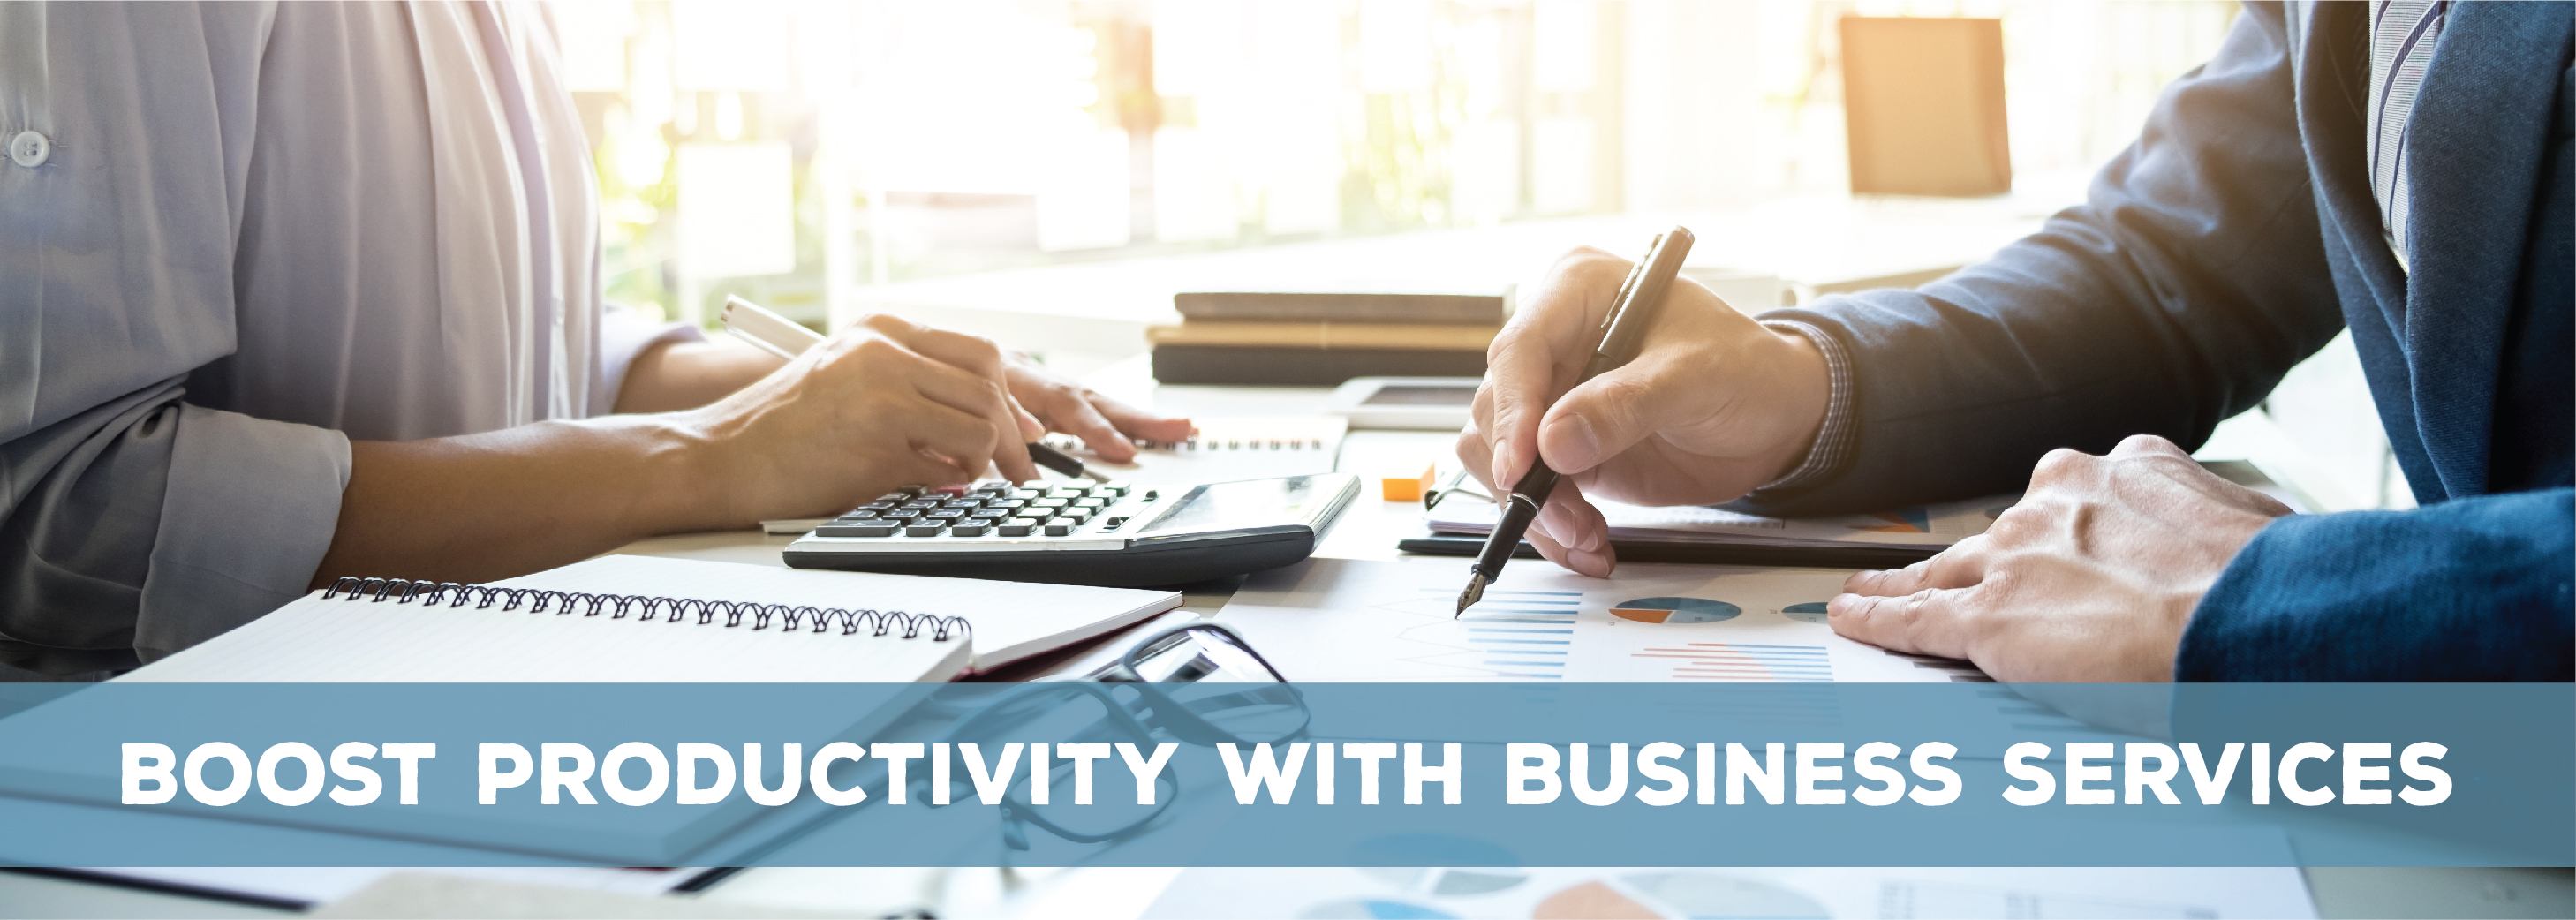 Boost Productivity with Business Services | ADI Agency